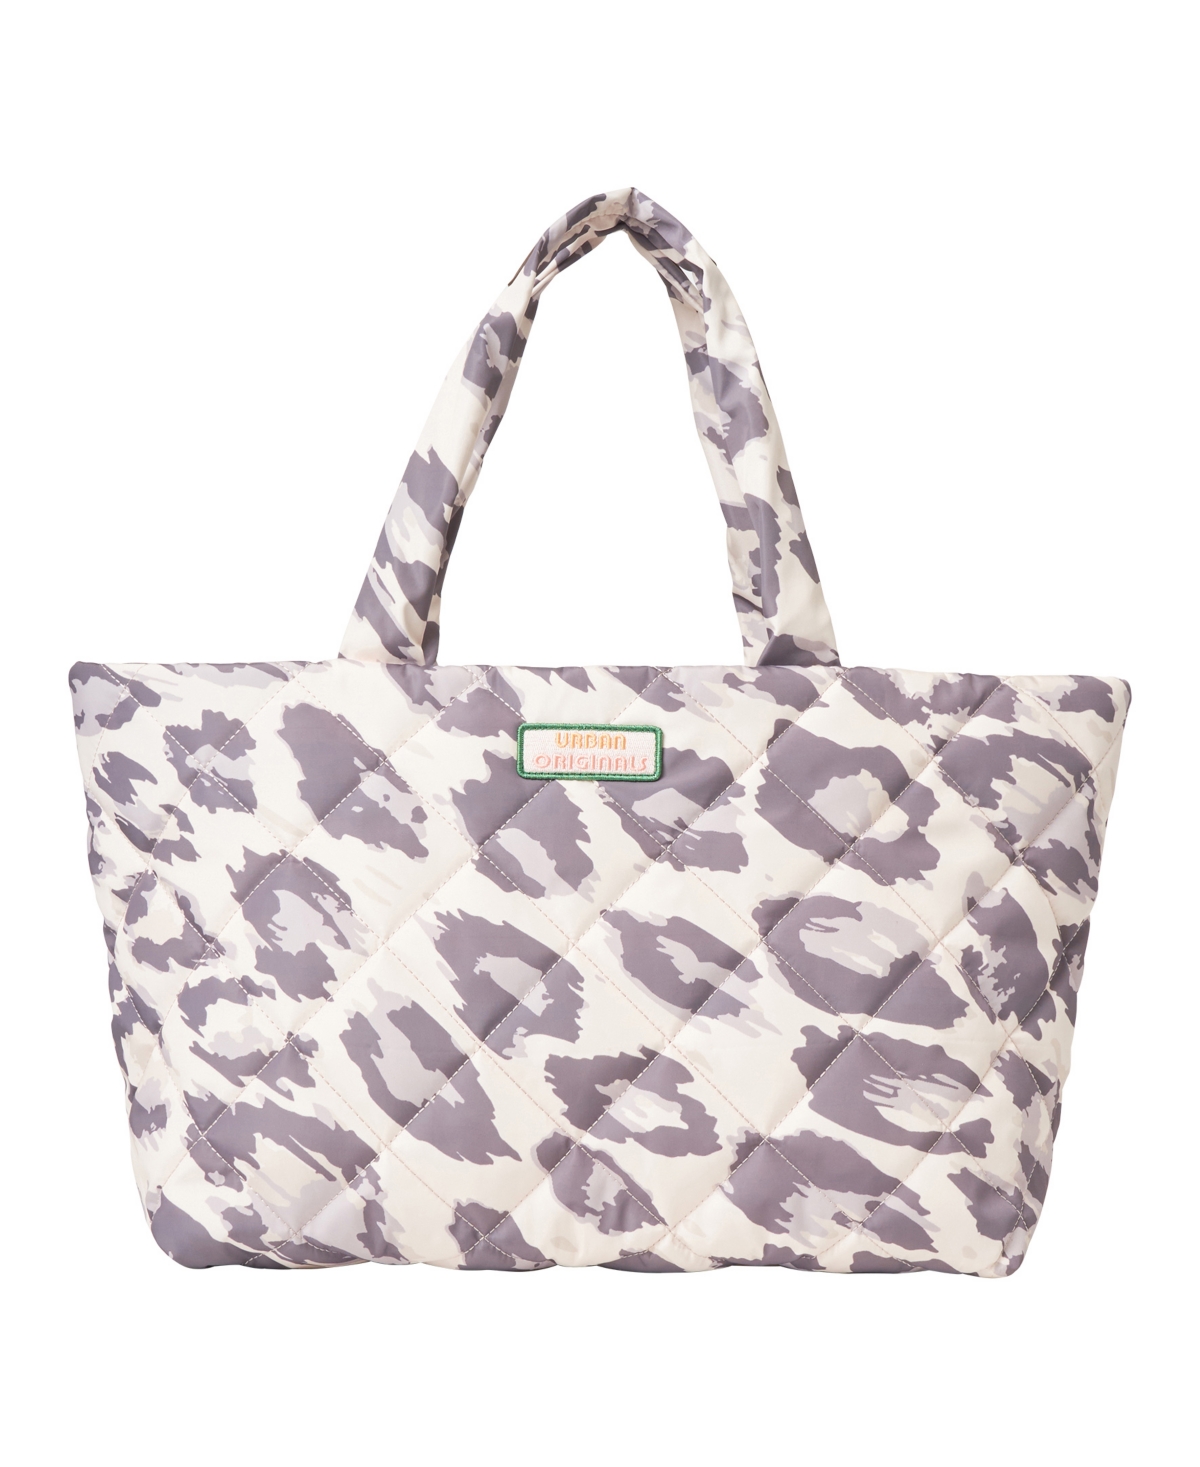 Tropical Extra Large Tote Bag - Leopard